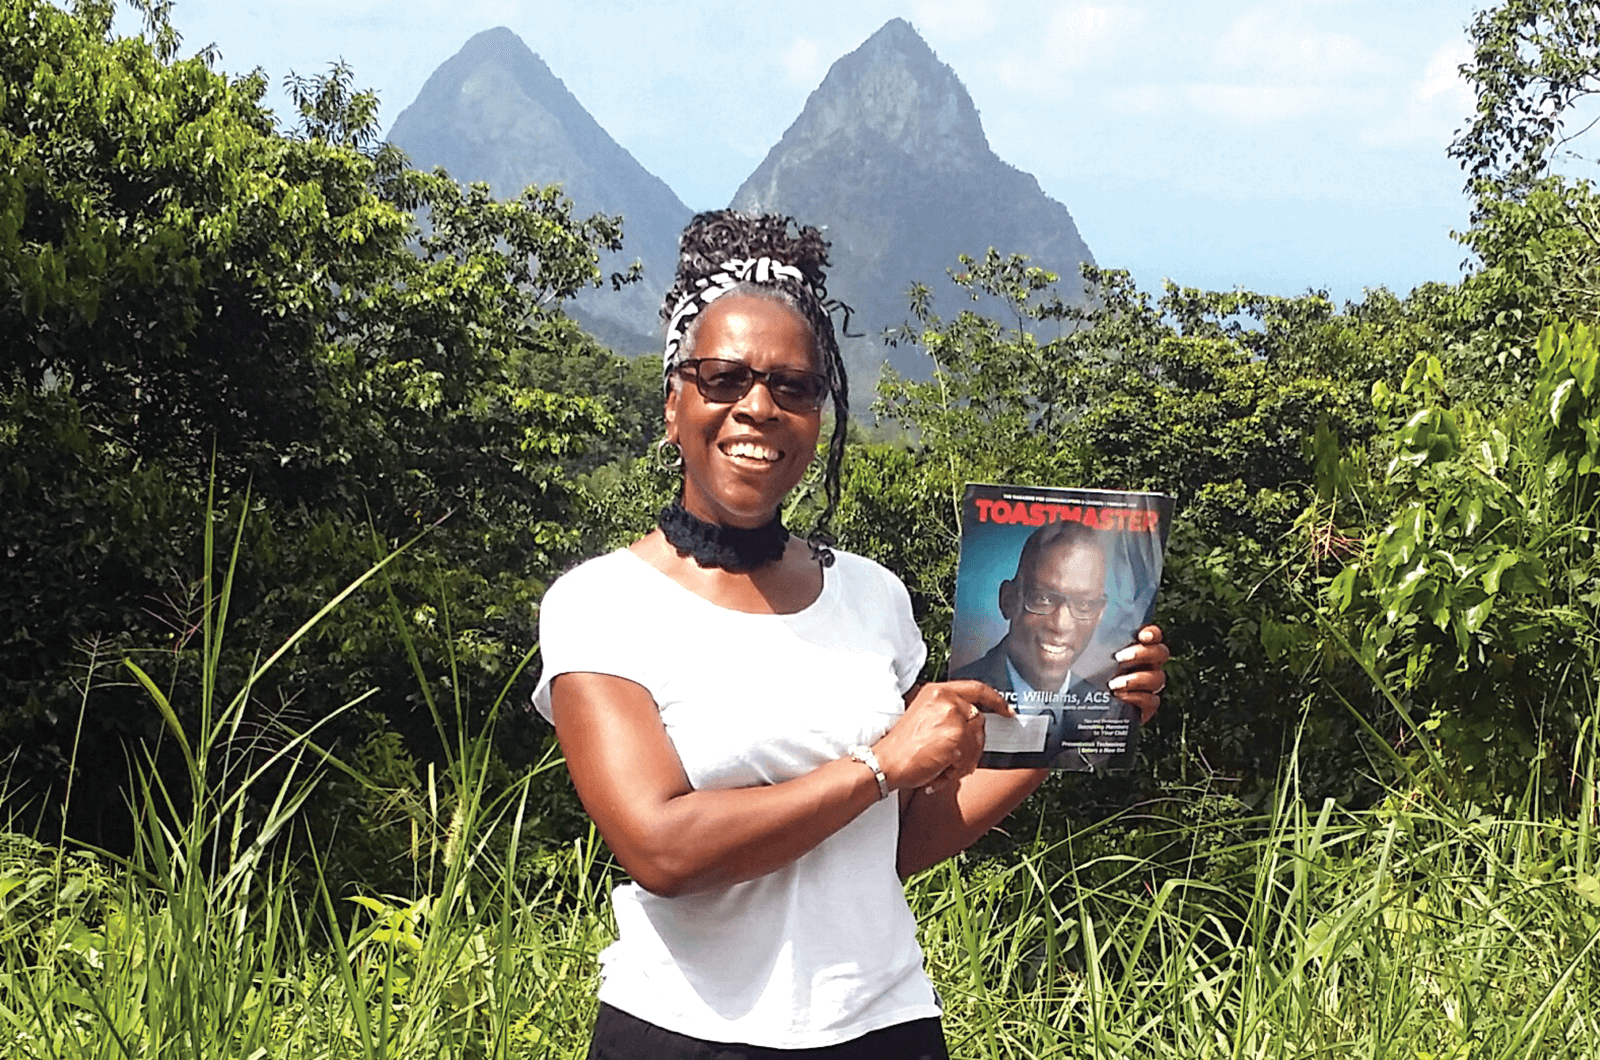 Ann Lawson, ACS, ALB, of Acworth, Georgia, poses in front of the volcanic peaks of the Pitons in Soufriere, St. Lucia.